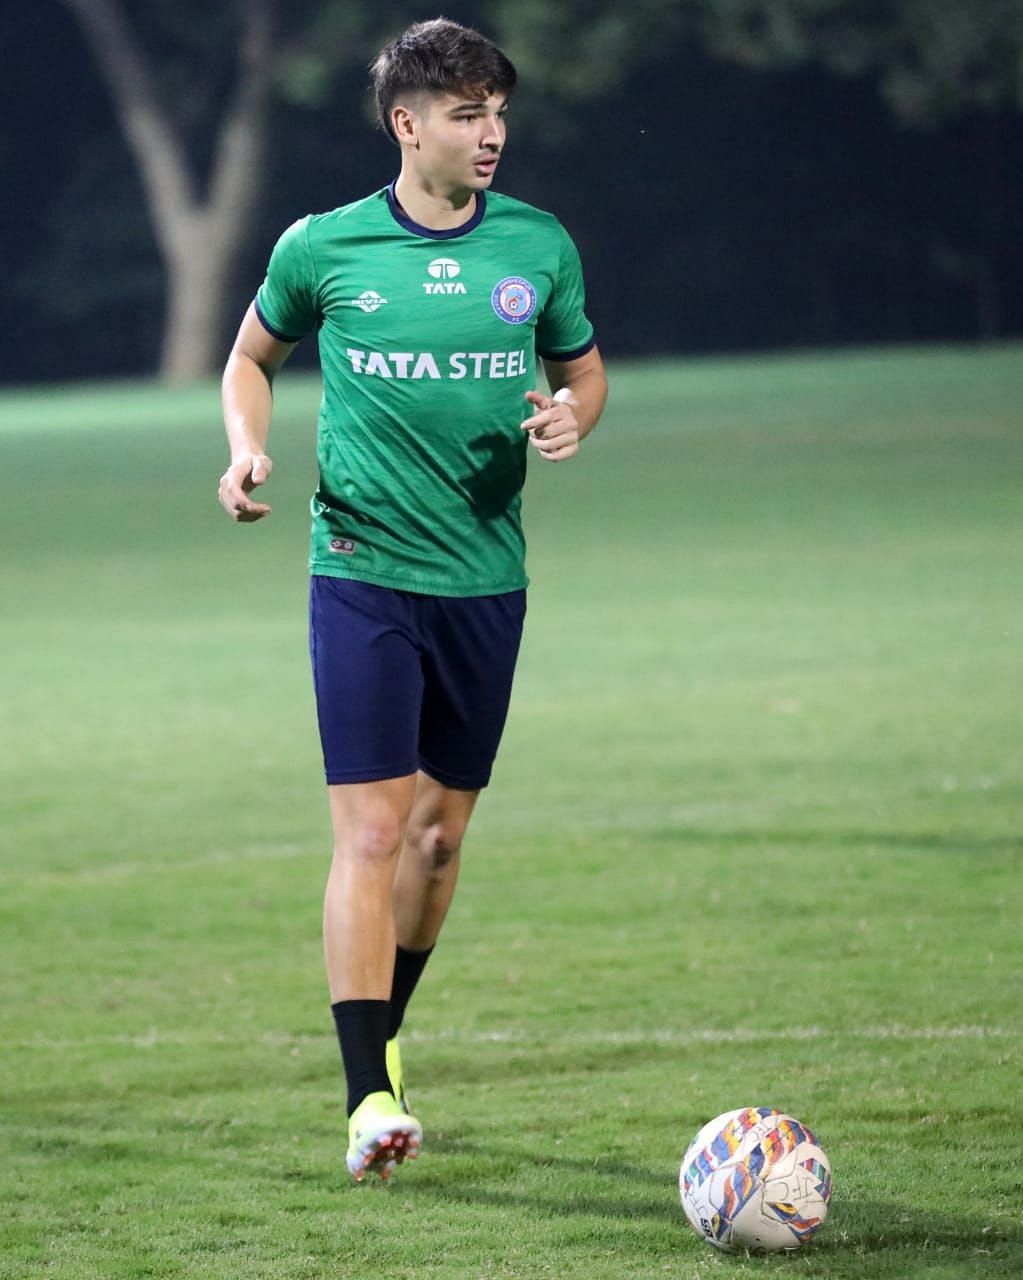 Siverio snapped while in training with Jamshedpur FC. (JFC Media)